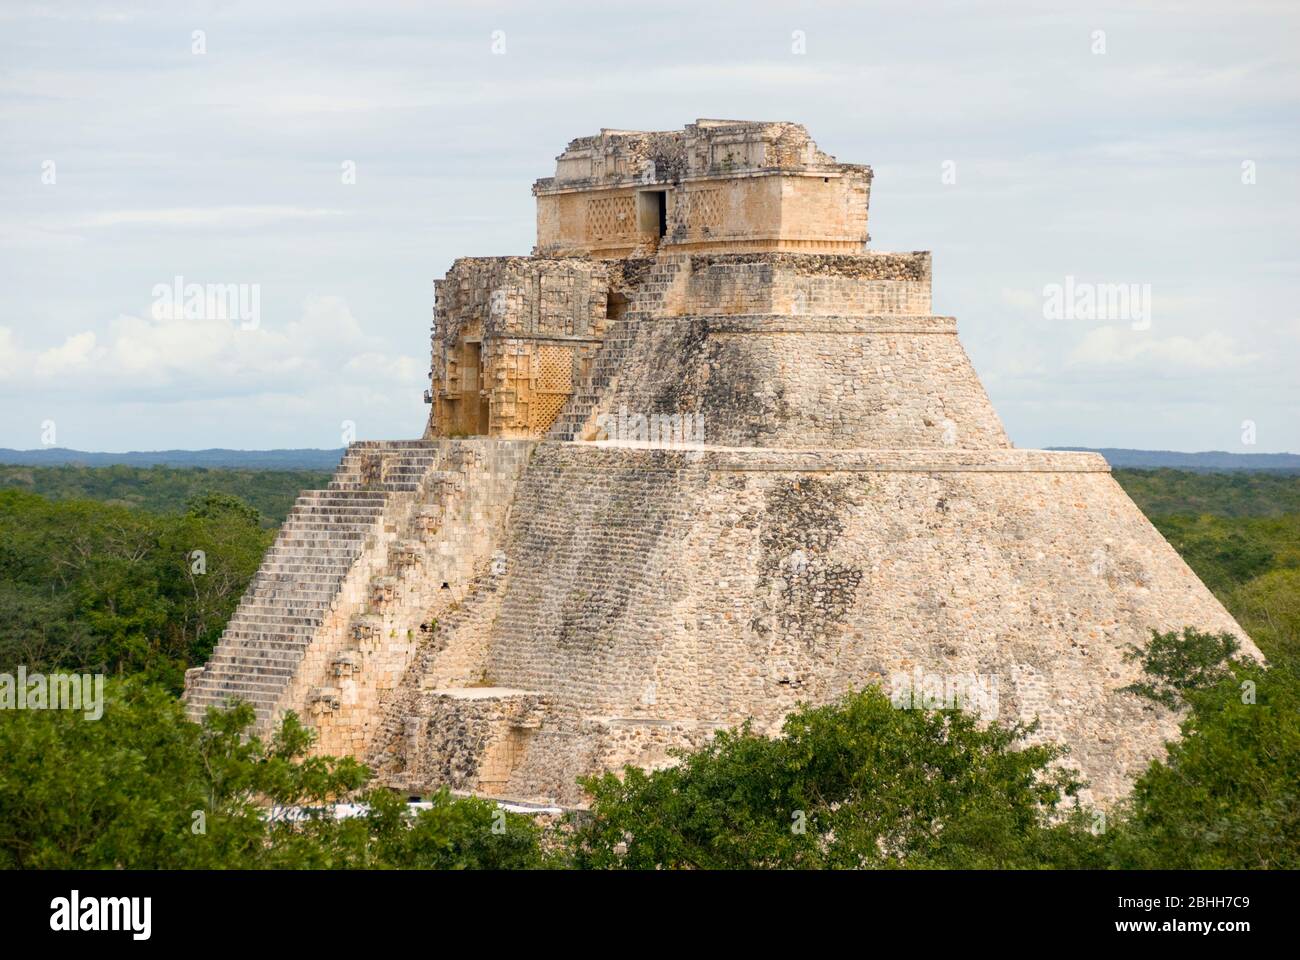 Mexico – Jan 19 2007: Adivino or The Pyramid of the Magician stands tall, looming  over the jungle canopy at  Uxmal Stock Photo